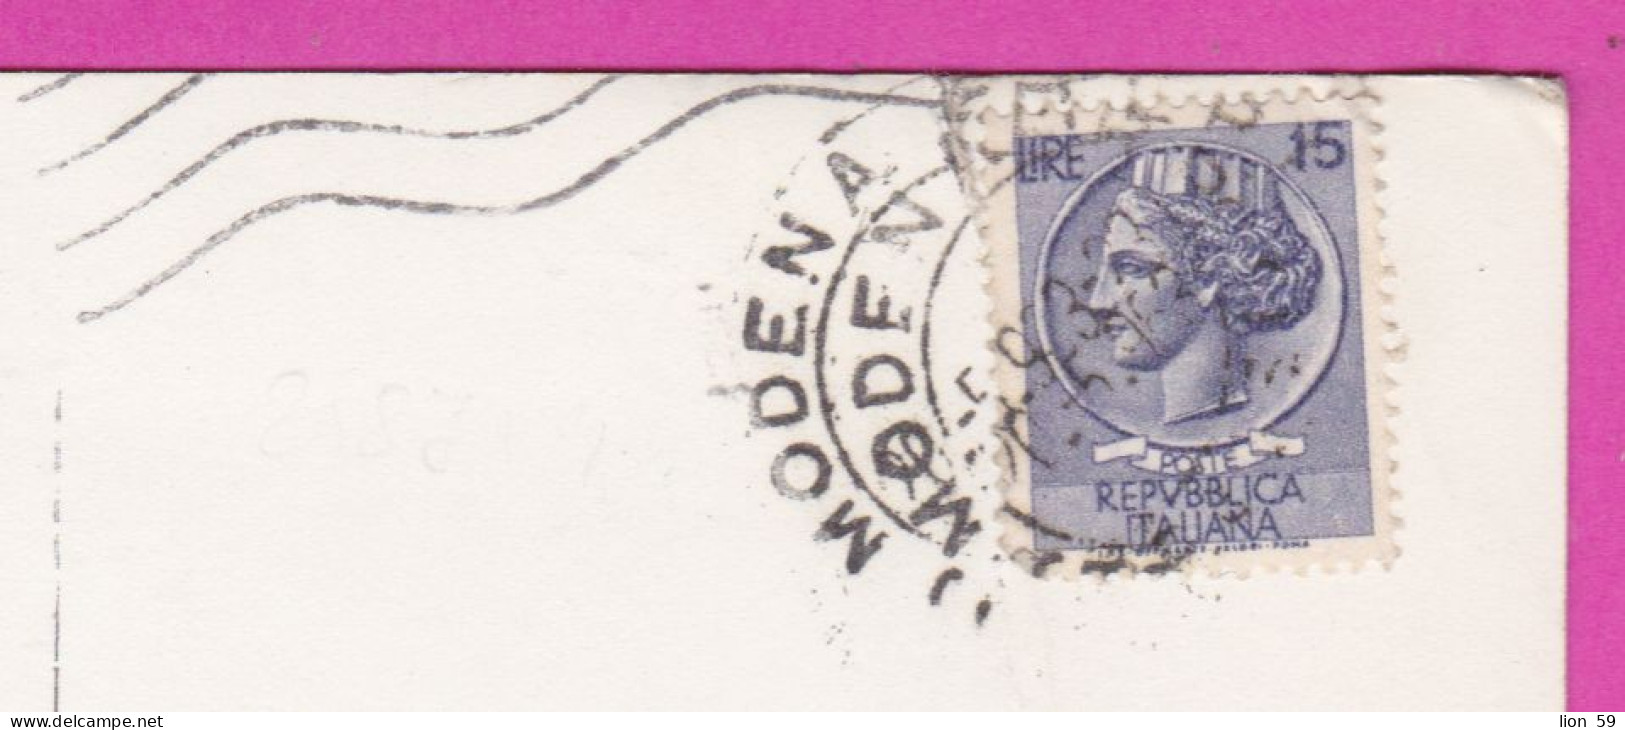 293920 / Italy - MODENA - The Cathedral XI Century The Inside PC 1963 USED 15 L Coin Of Syracuse - 1961-70: Poststempel